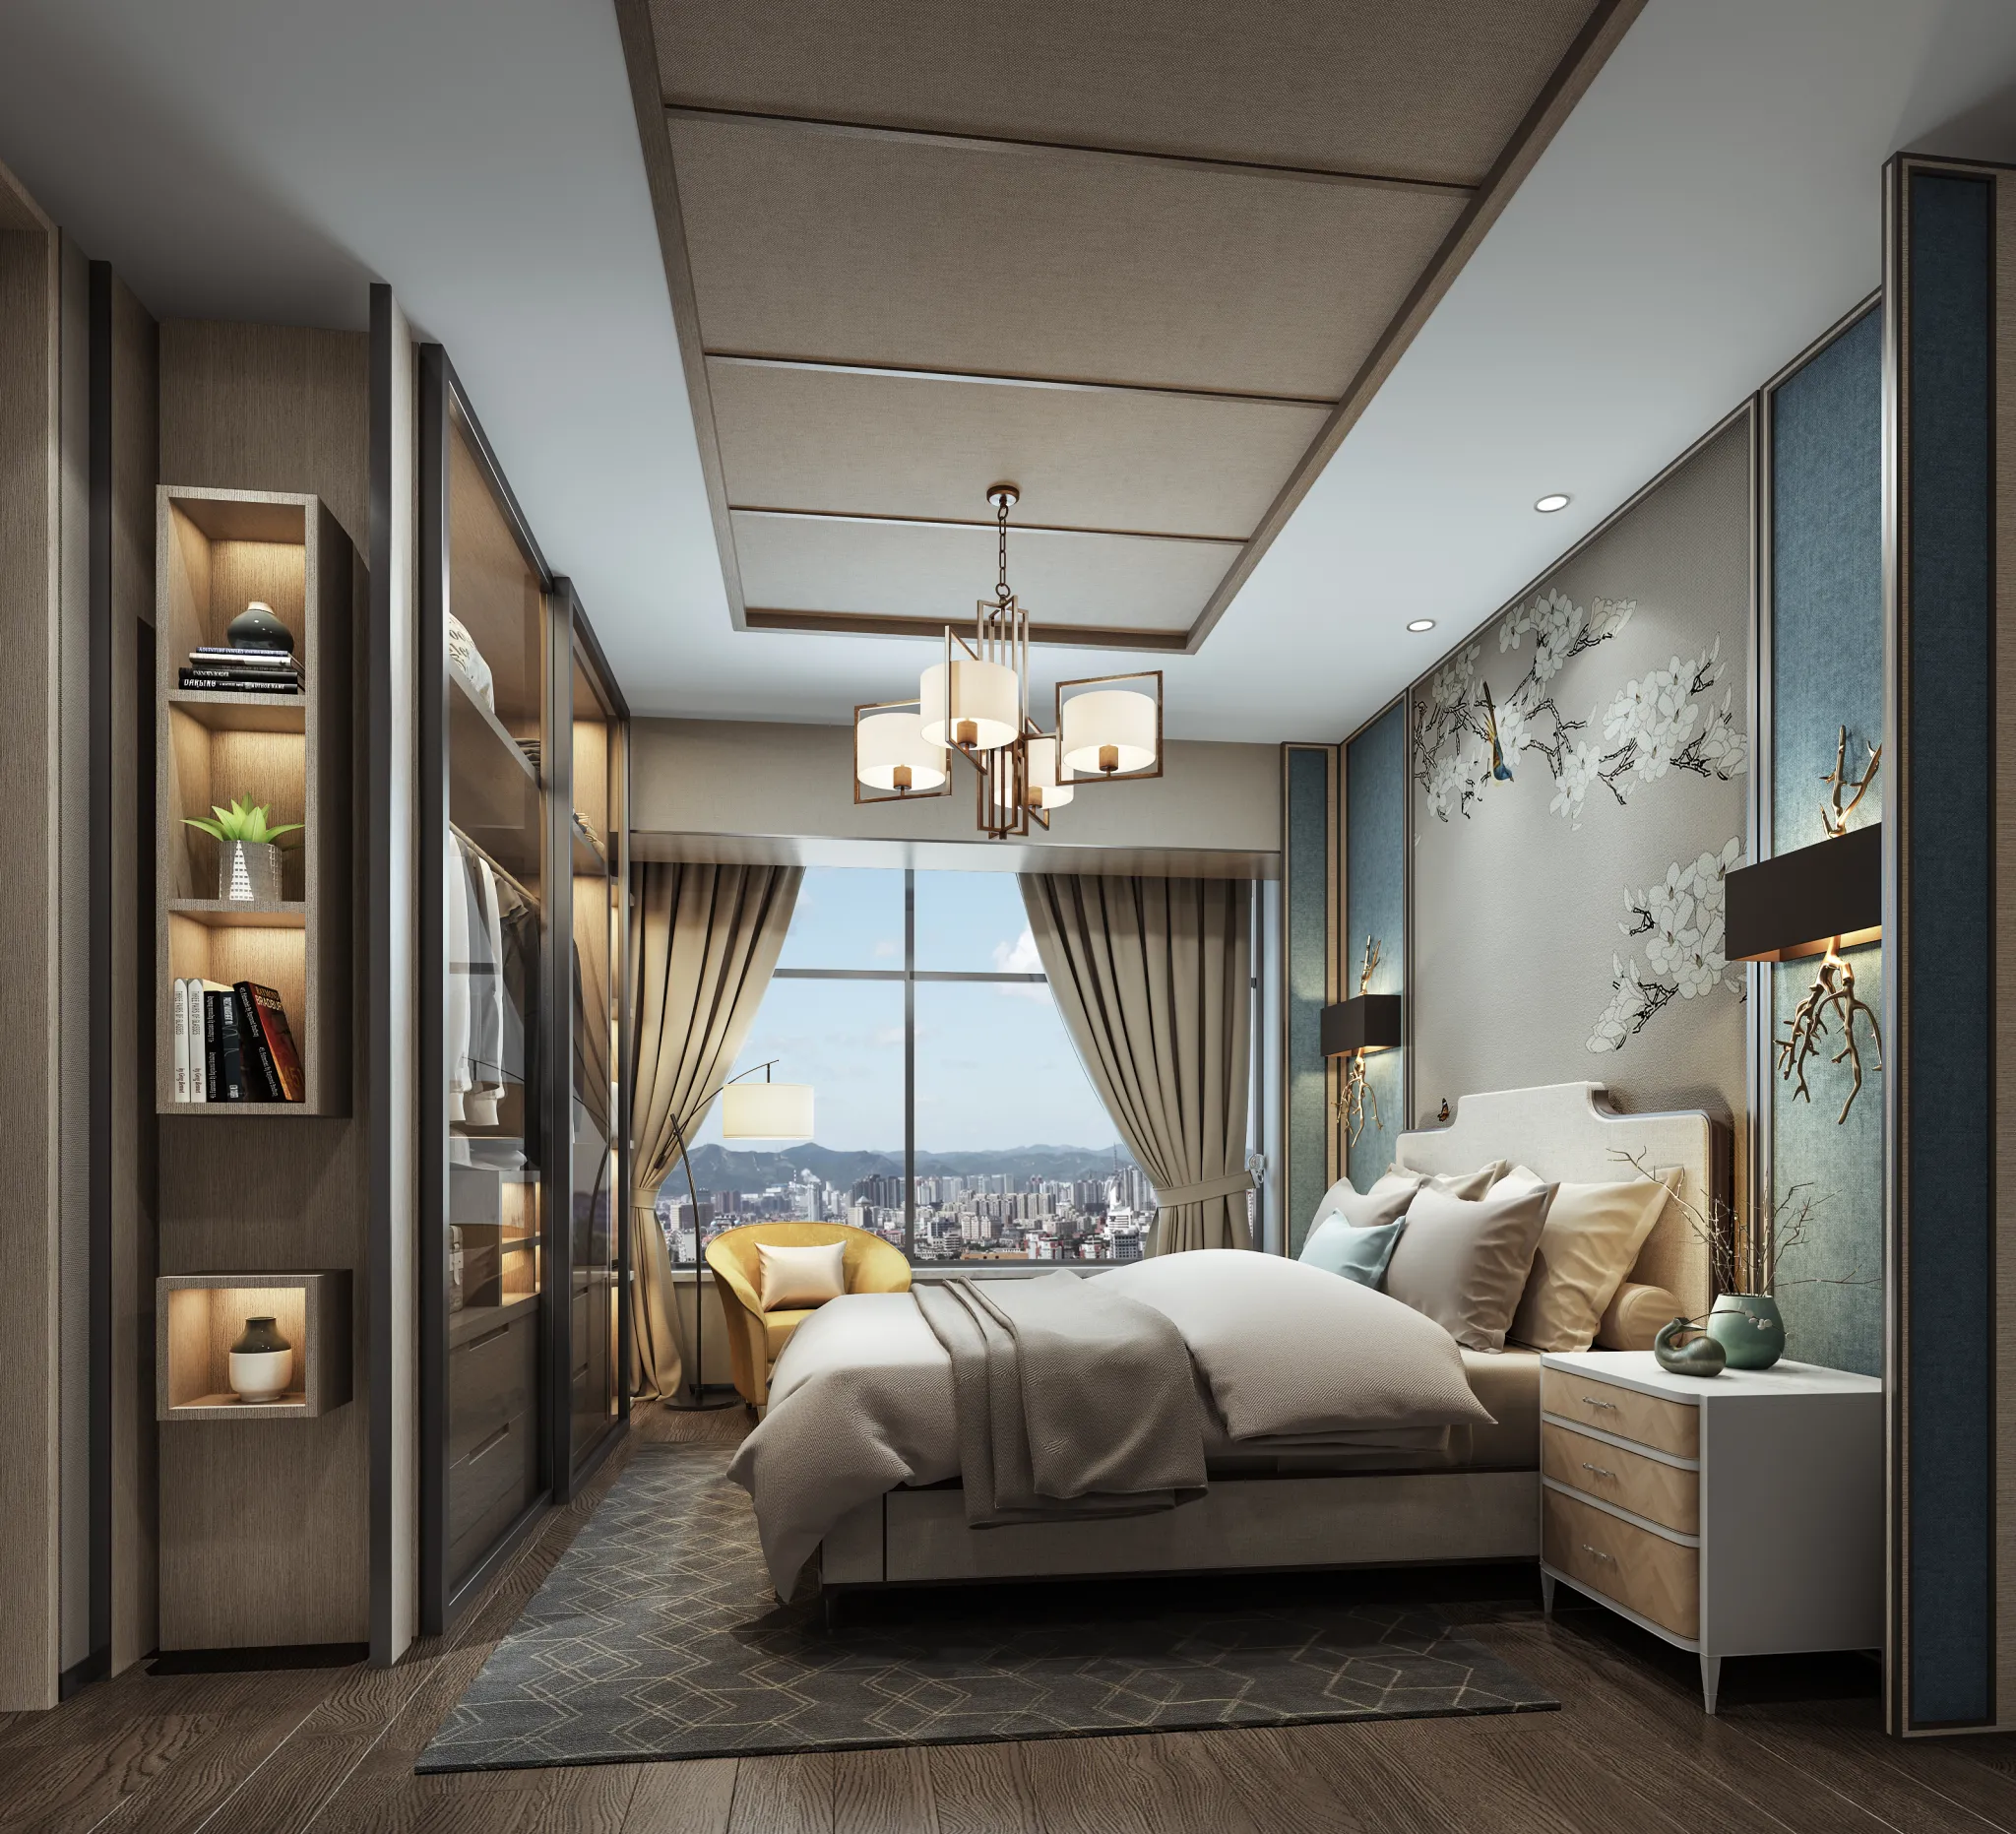 DESMOD INTERIOR 2021 (VRAY)/5. BEDROOM – 2. CHINESE STYLES – 012